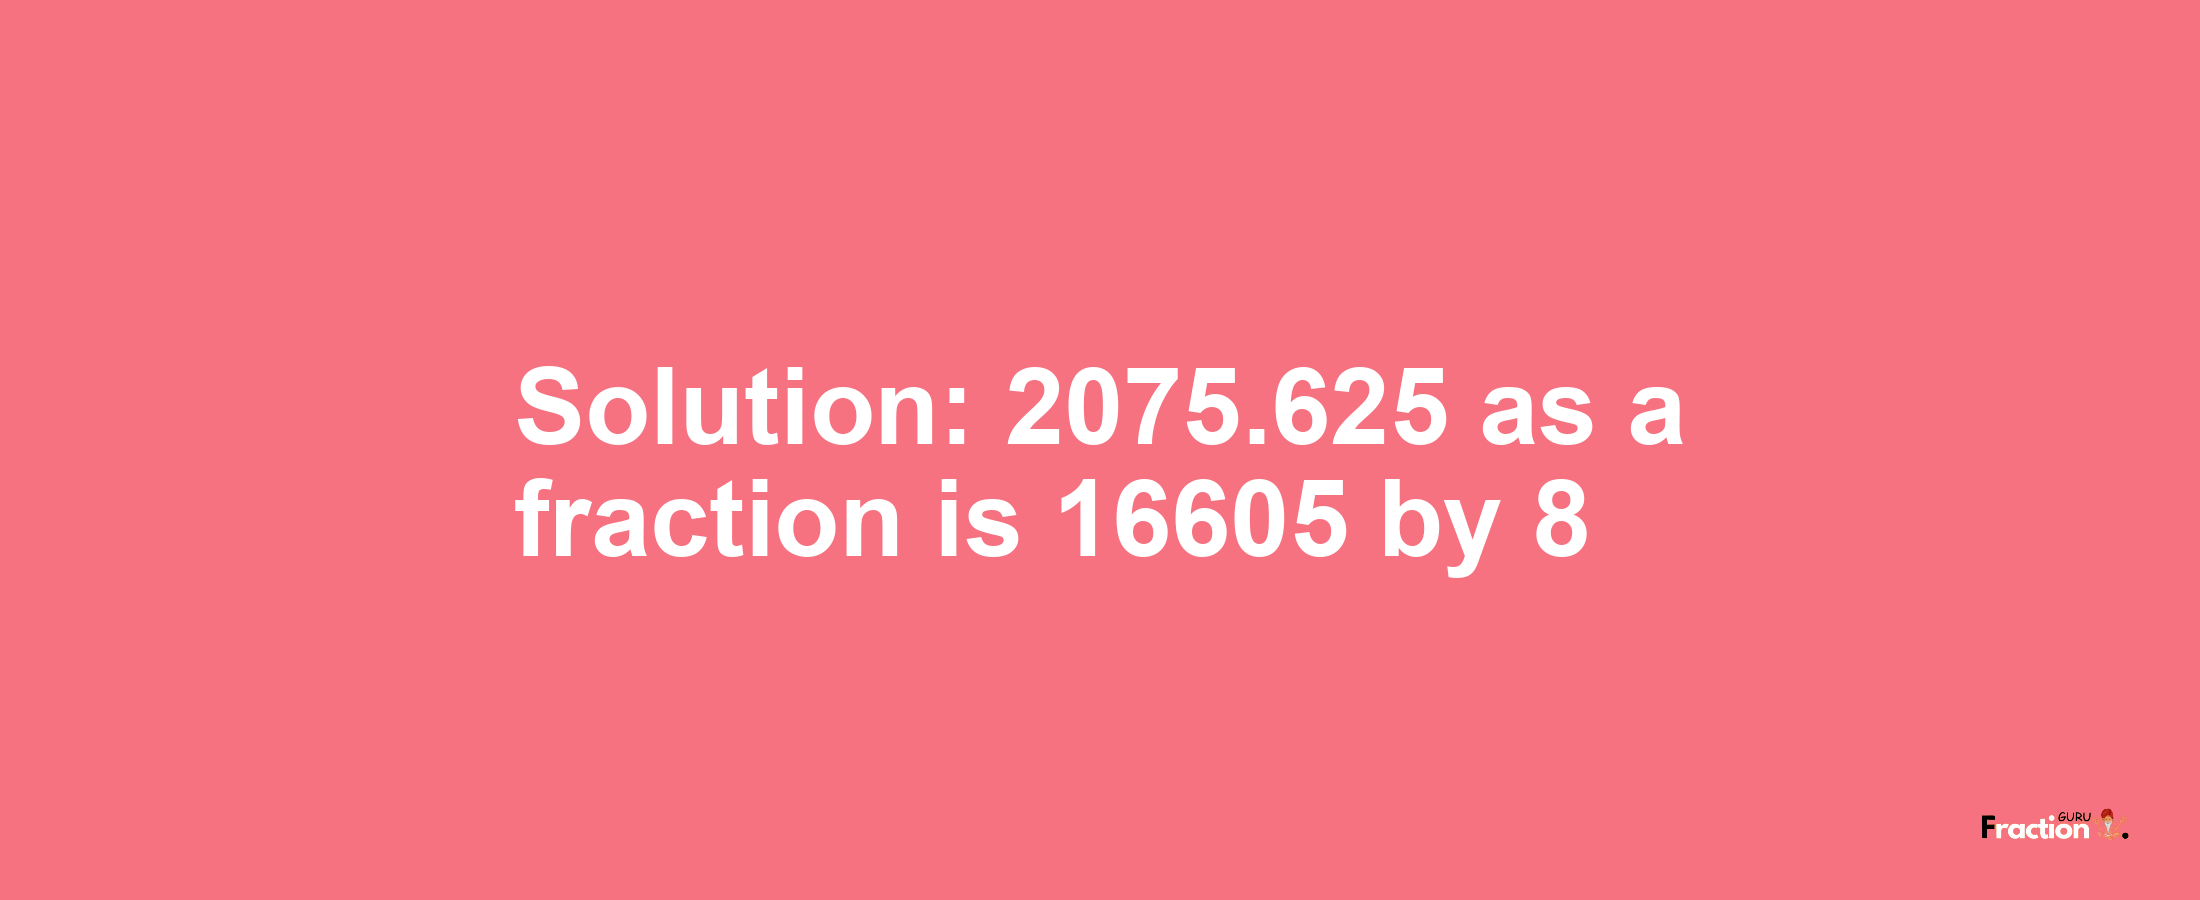 Solution:2075.625 as a fraction is 16605/8